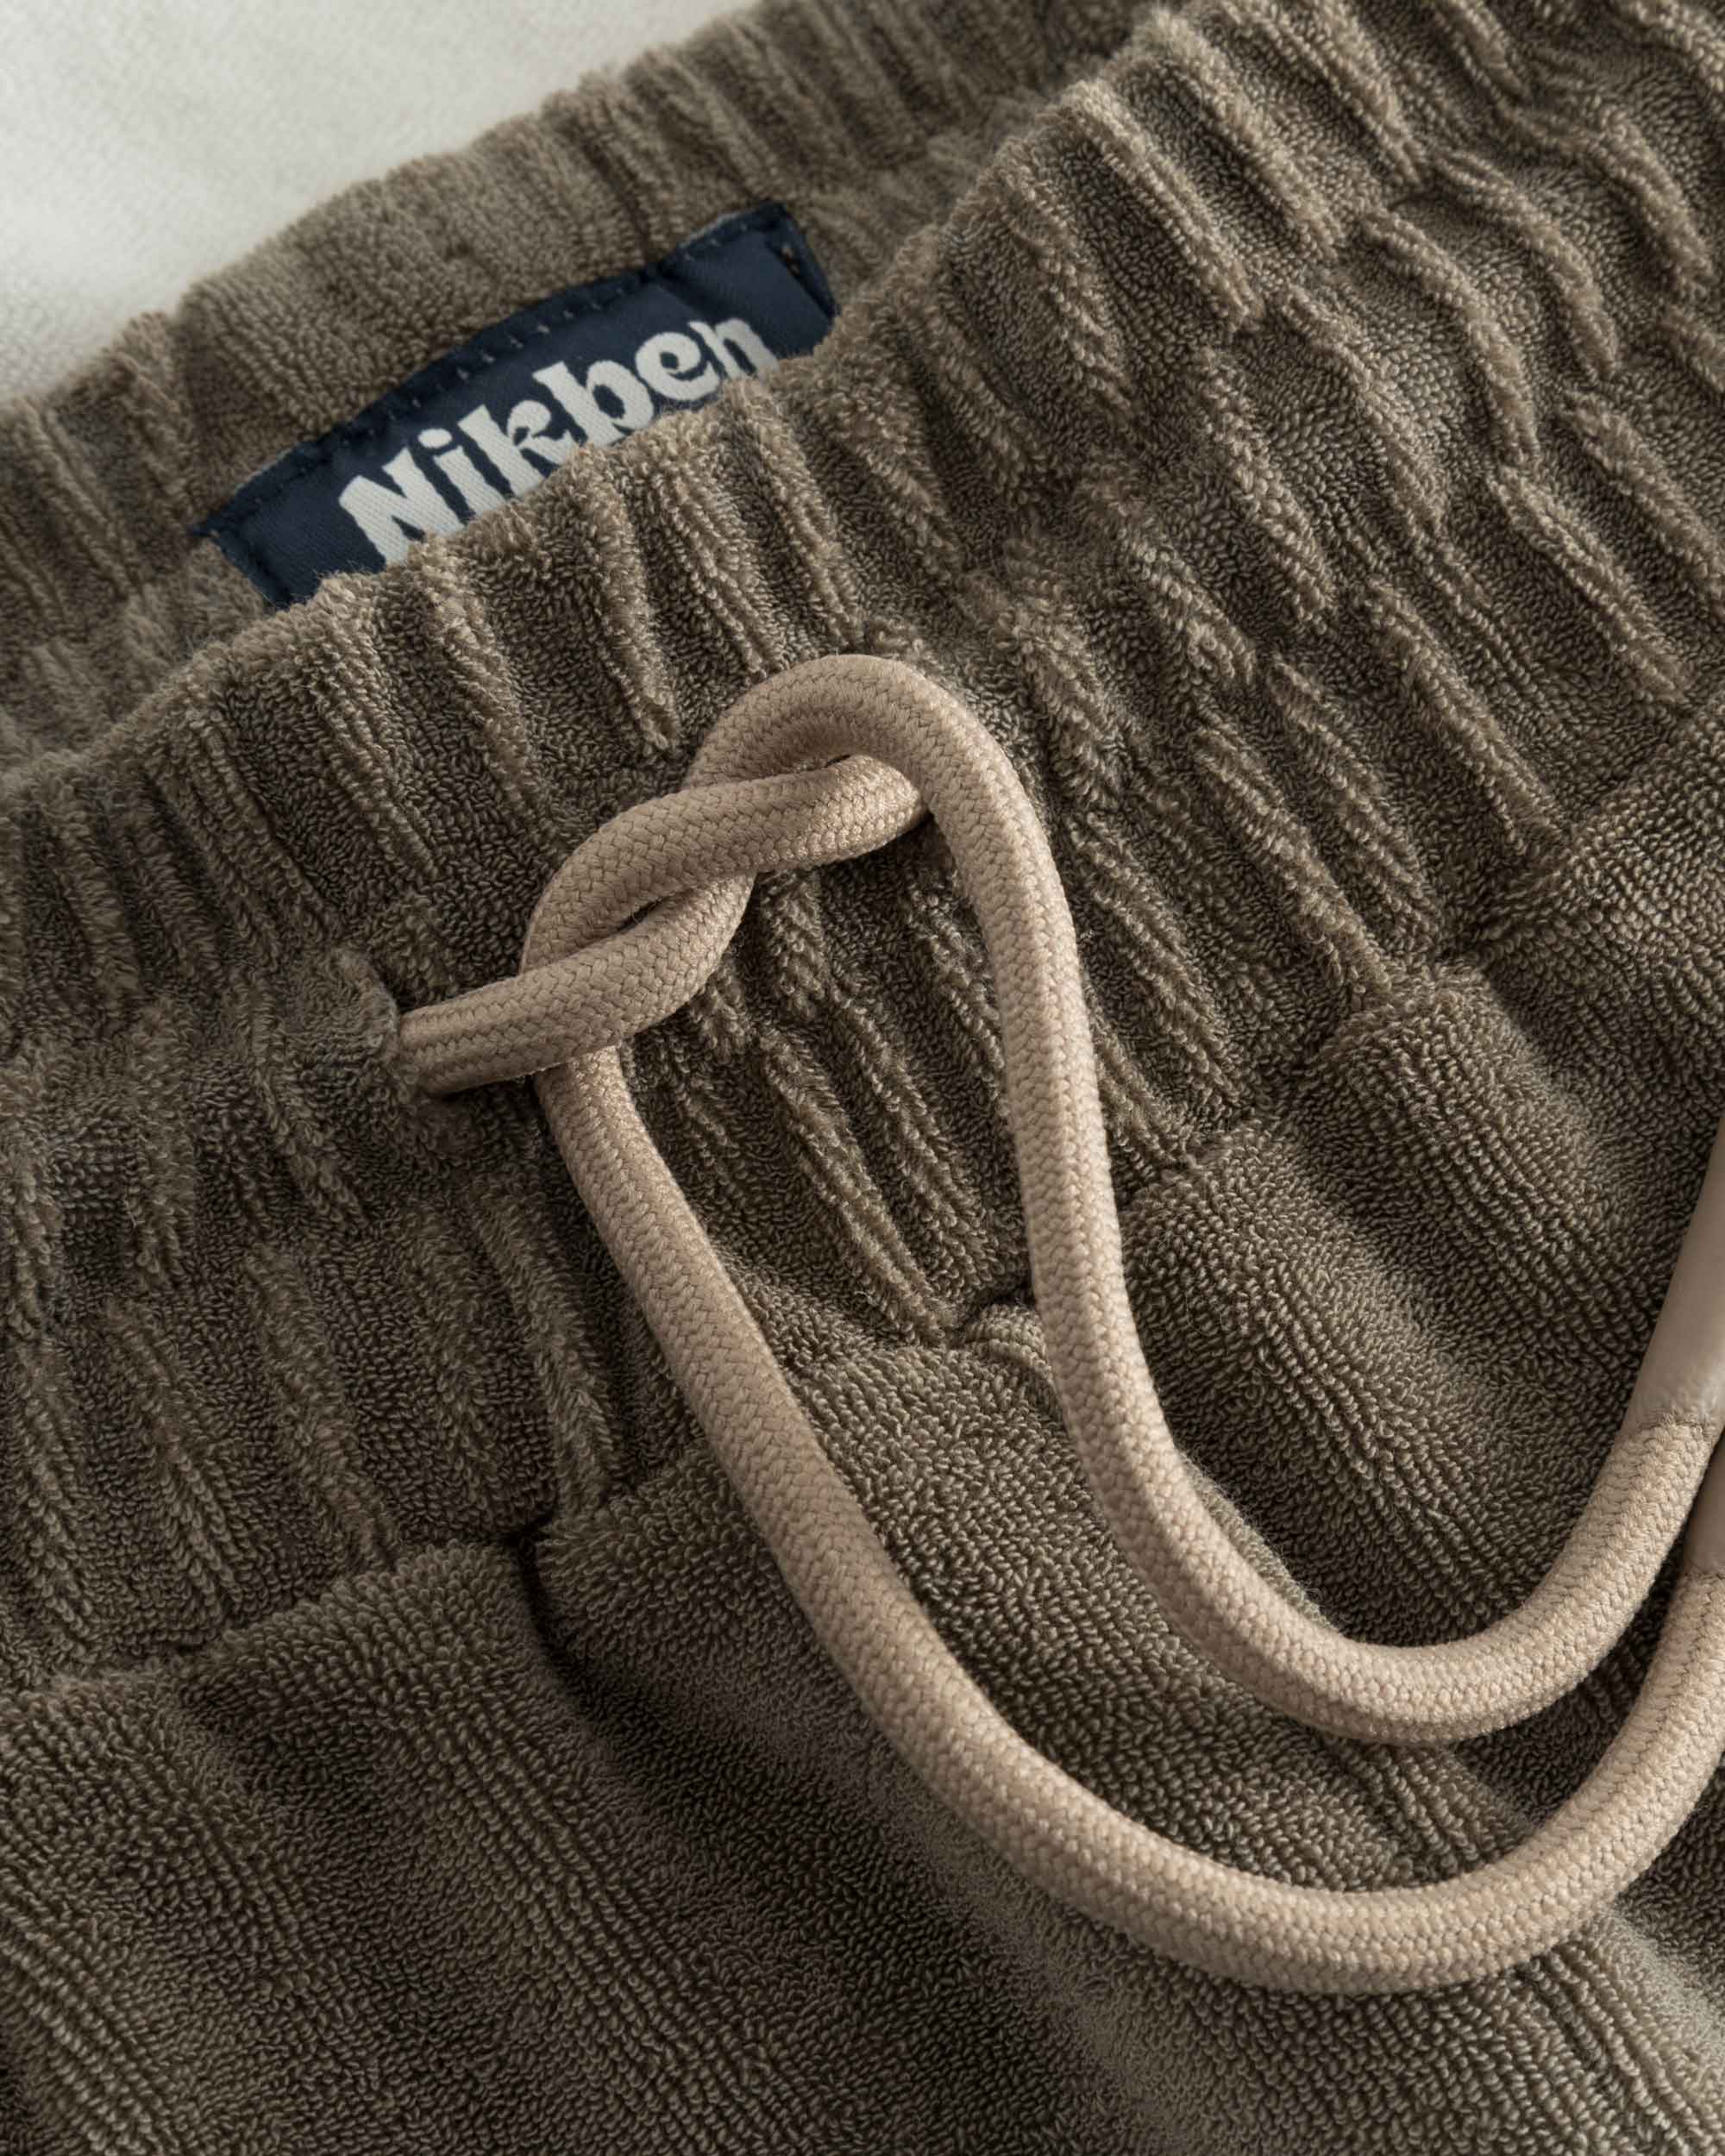 Close up on drawstring on brown and white low cut shorts in terry toweling fabric